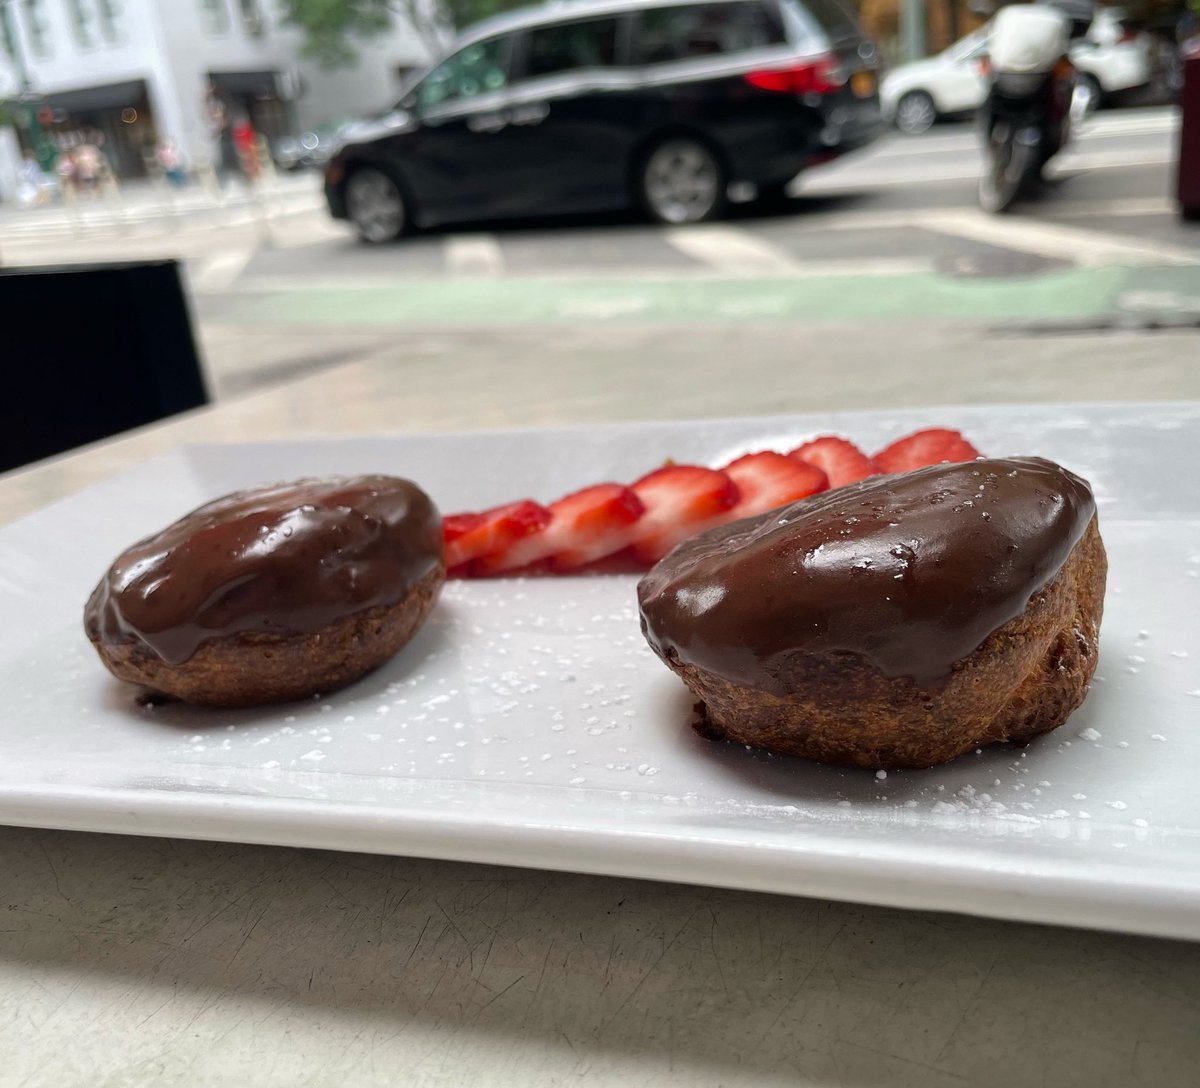 Start your week right with a tasty treat — how about these chocolate cream puffs made by our wunderkind pastry chef Daron? If you like eclairs, you’ll love these. Bon appetit! 
#mannysbistro #dessert #desserts #nyc #newyorkcity #newyork #nomnom #newyorknewyork #chocolate #uws